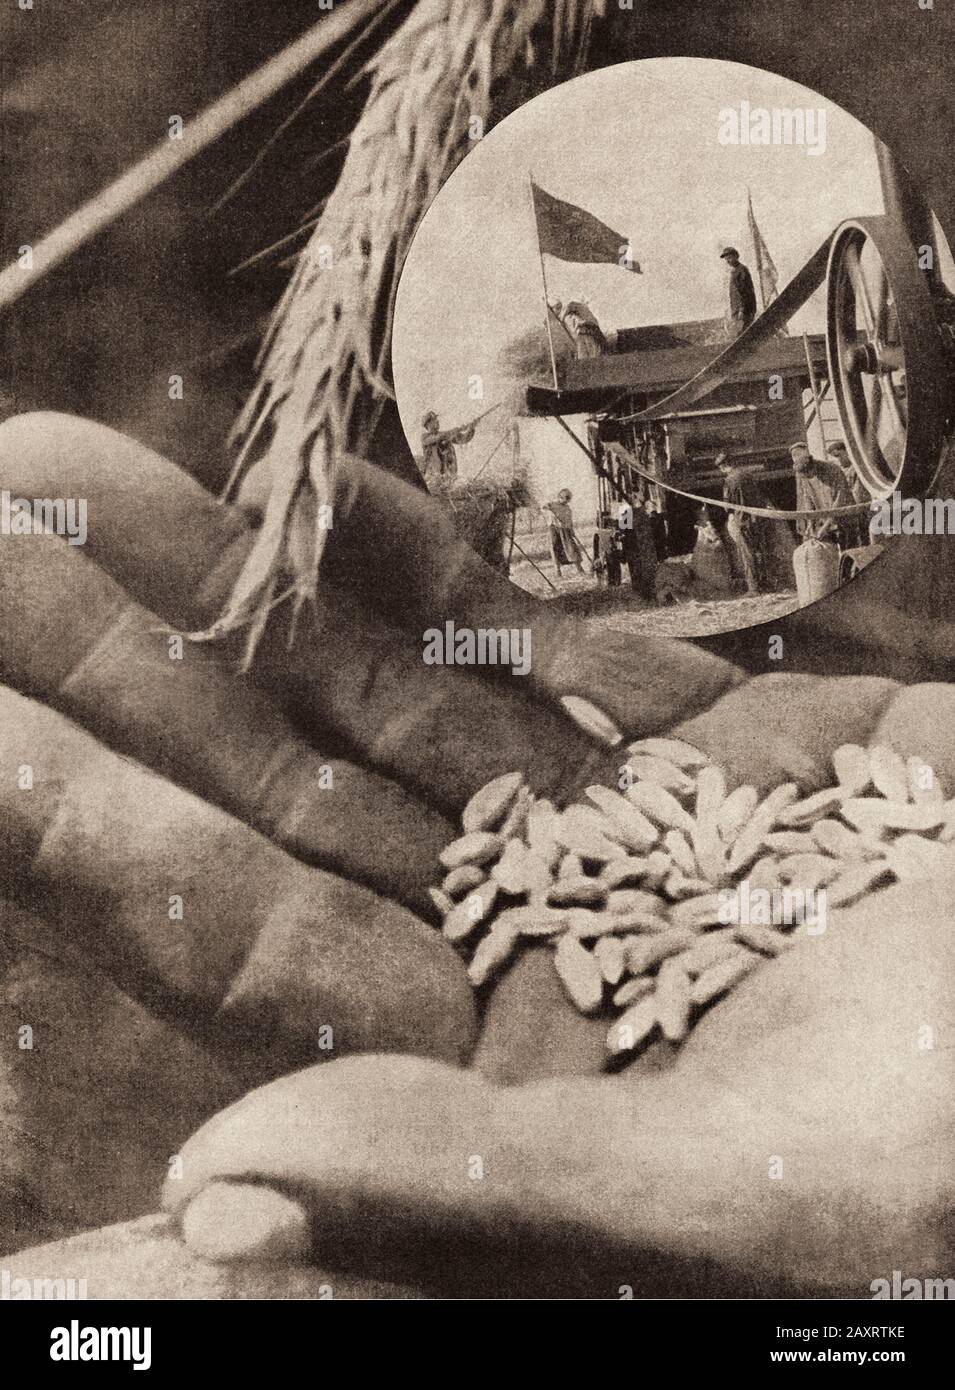 The life in Soviet Union in 1930s. From soviet propaganda book. Industrialization of agriculture Stock Photo